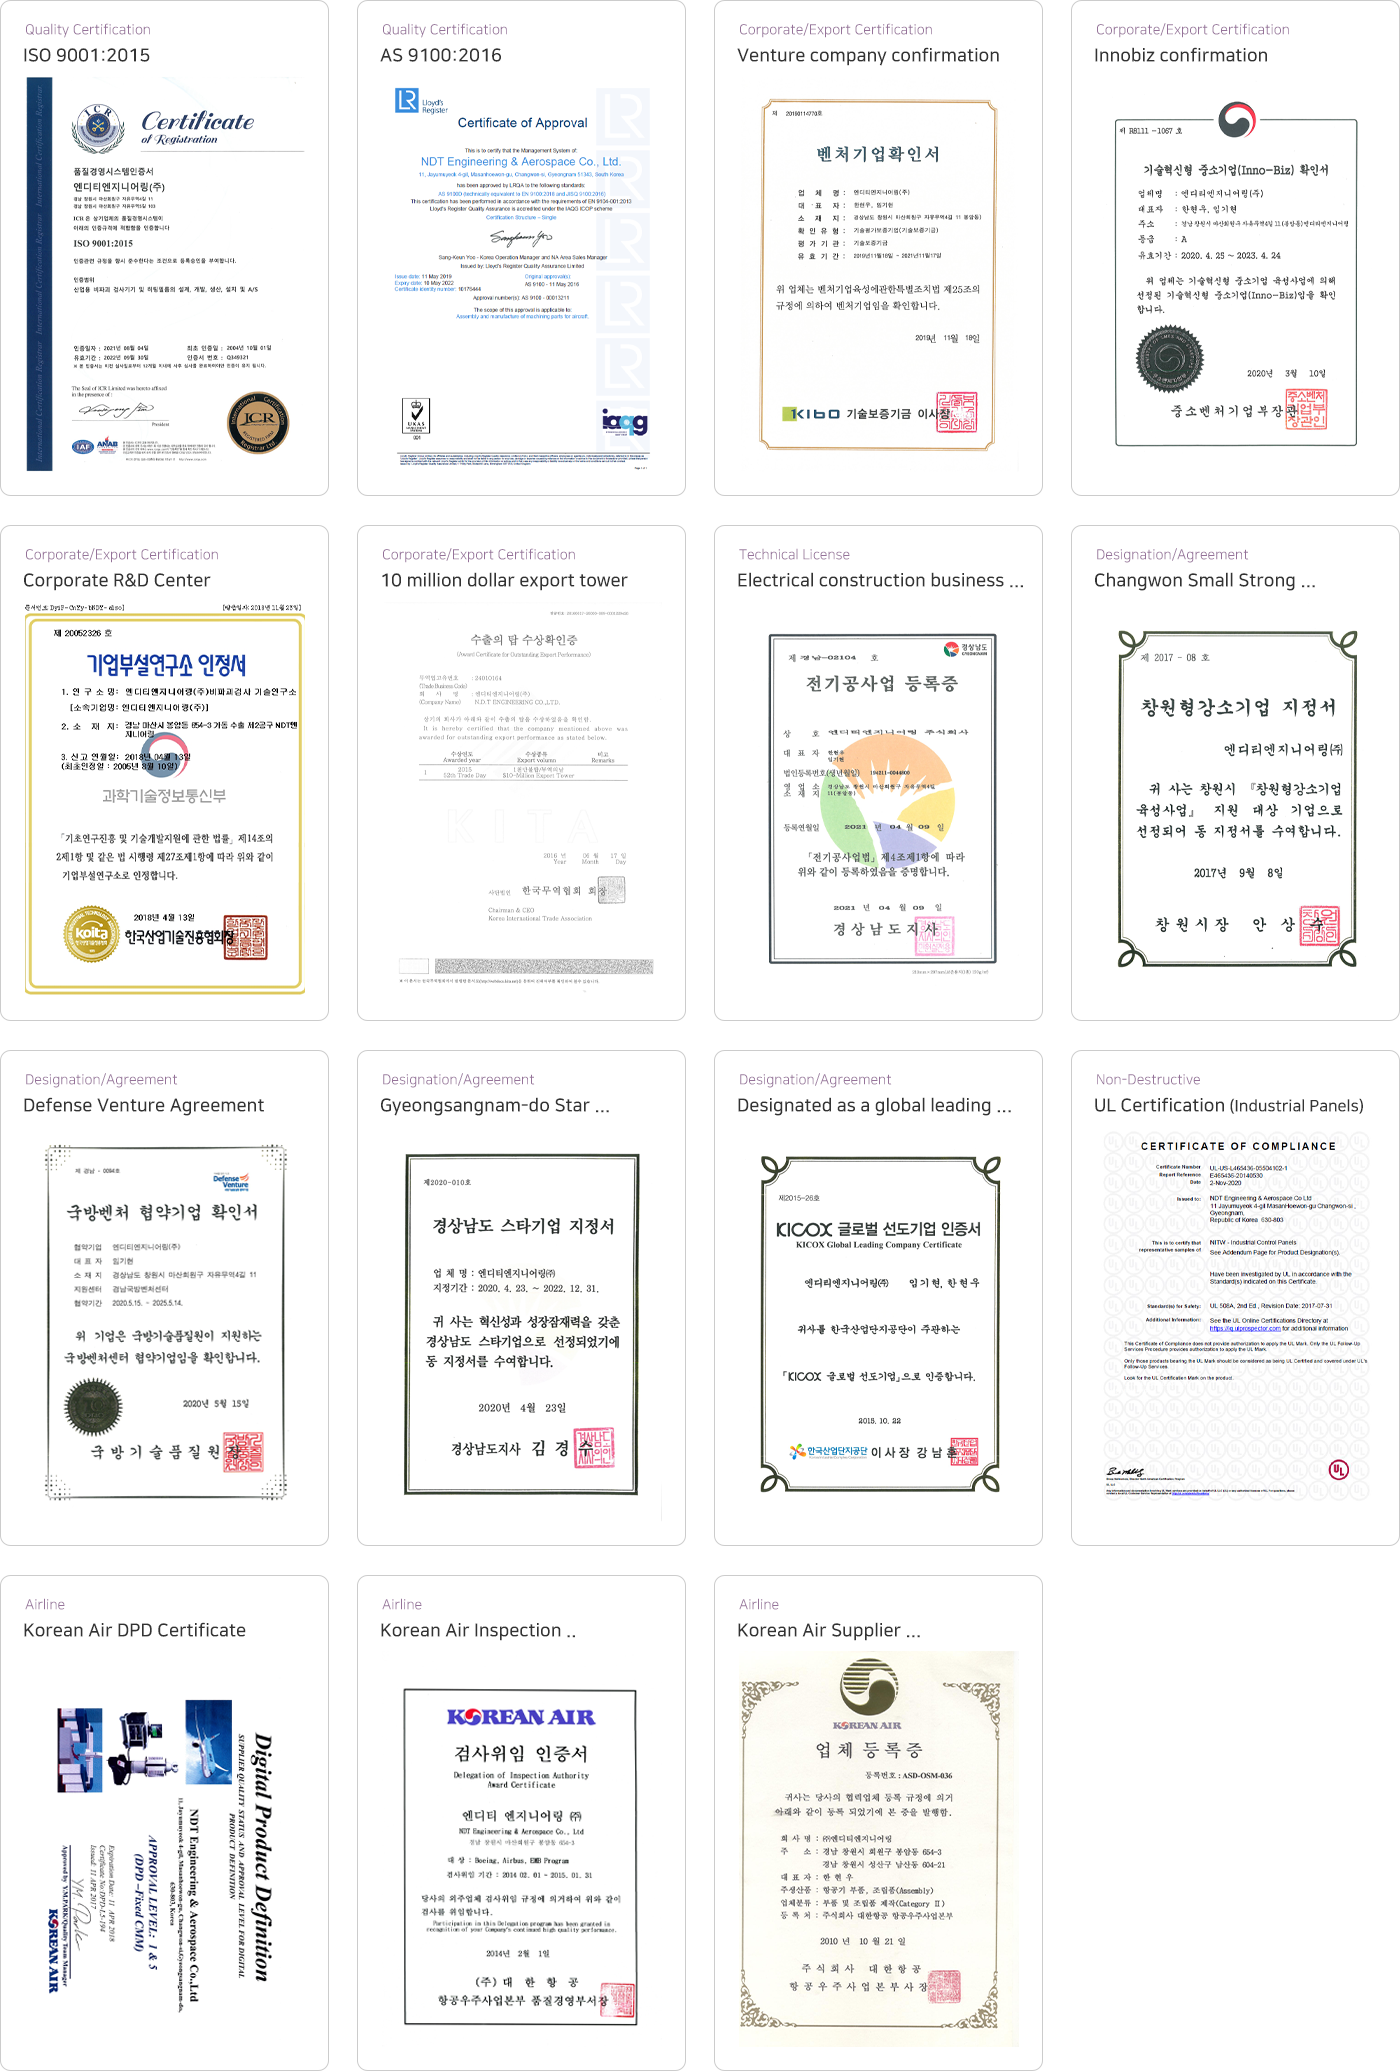 Certification and Patent Status